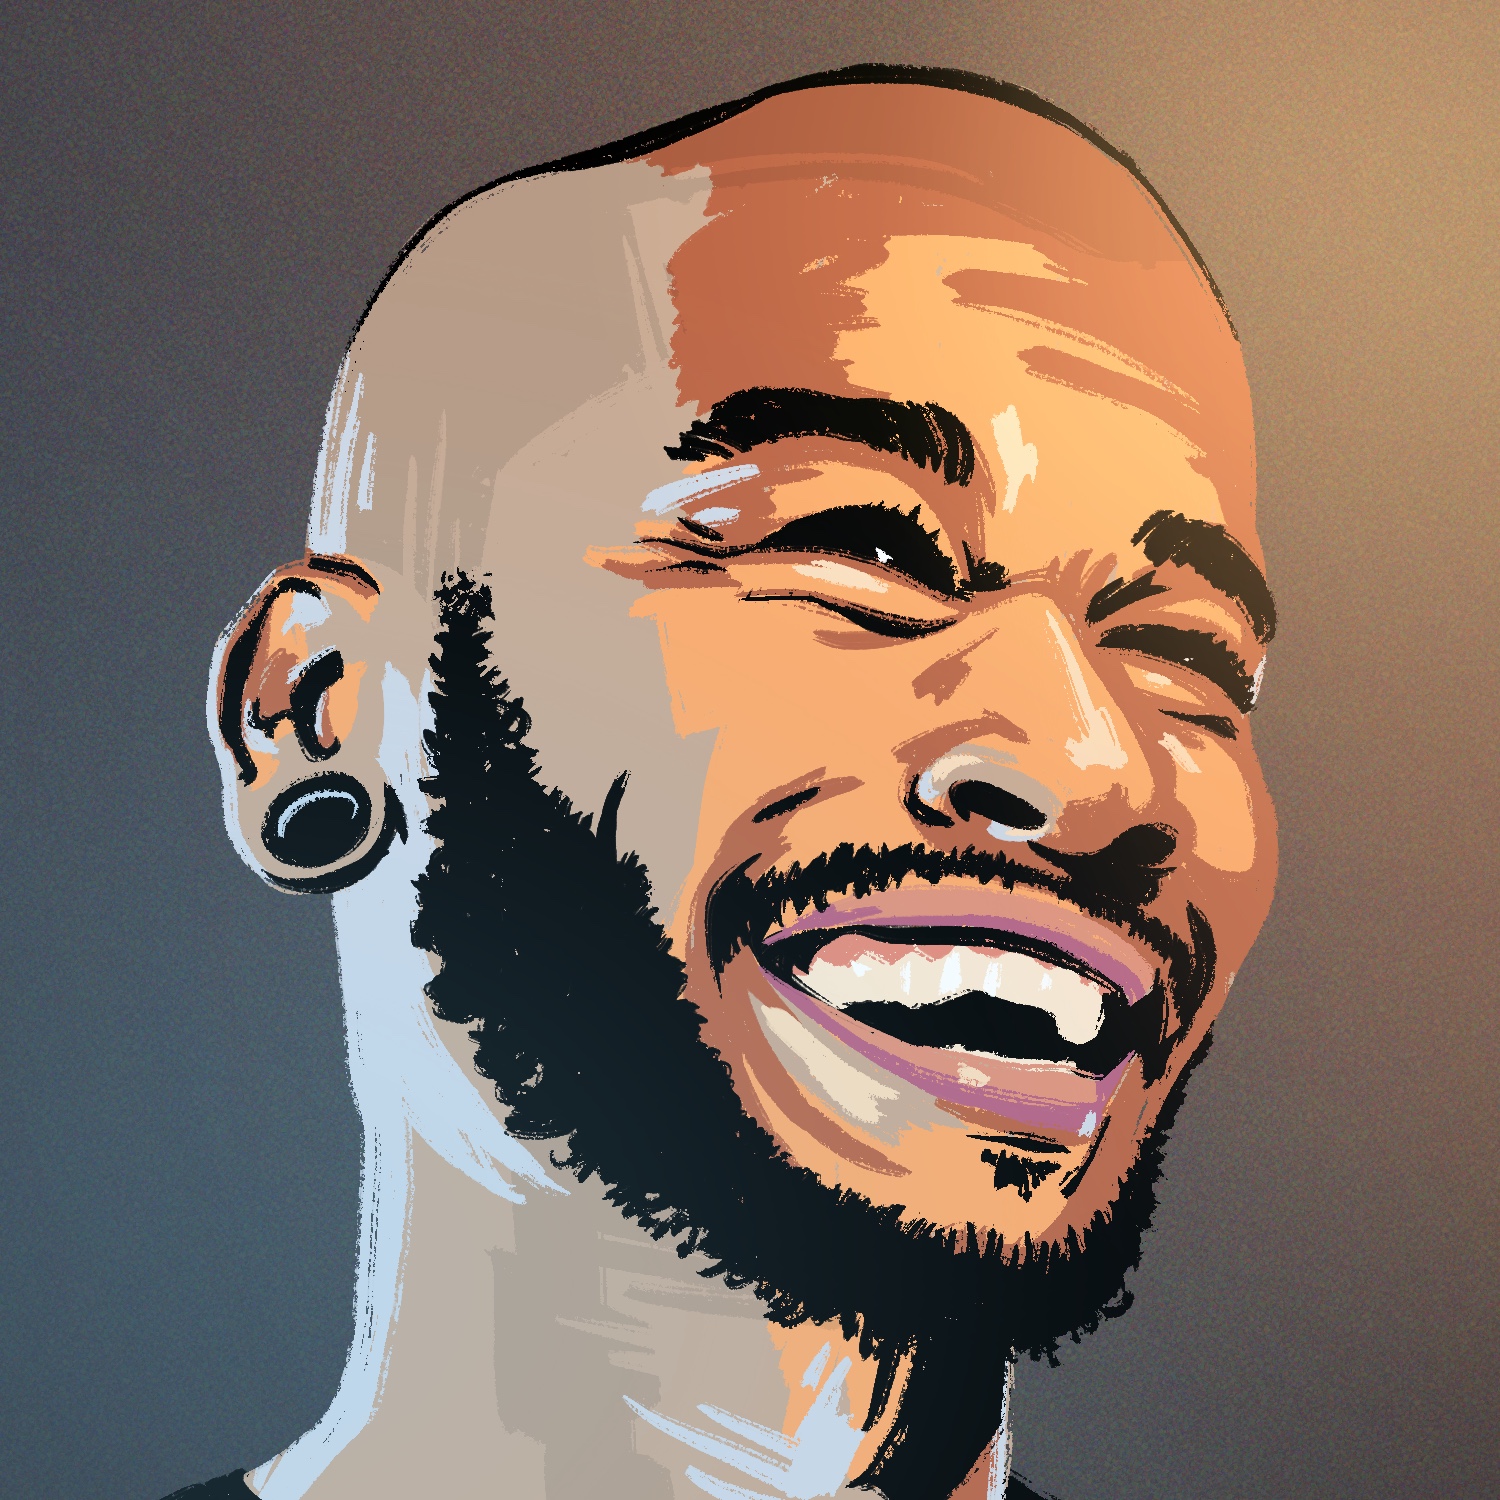 An illustration of a man laughing. The man is facing to the right and has a medium-dark complexion, dark eyes, a shaved head, and light beard and mustache. His mouth is open and smiling, and his eyes are squinted nearly shut. He is lit by a bright orange light on the right. The angle of the image is from slightly below.